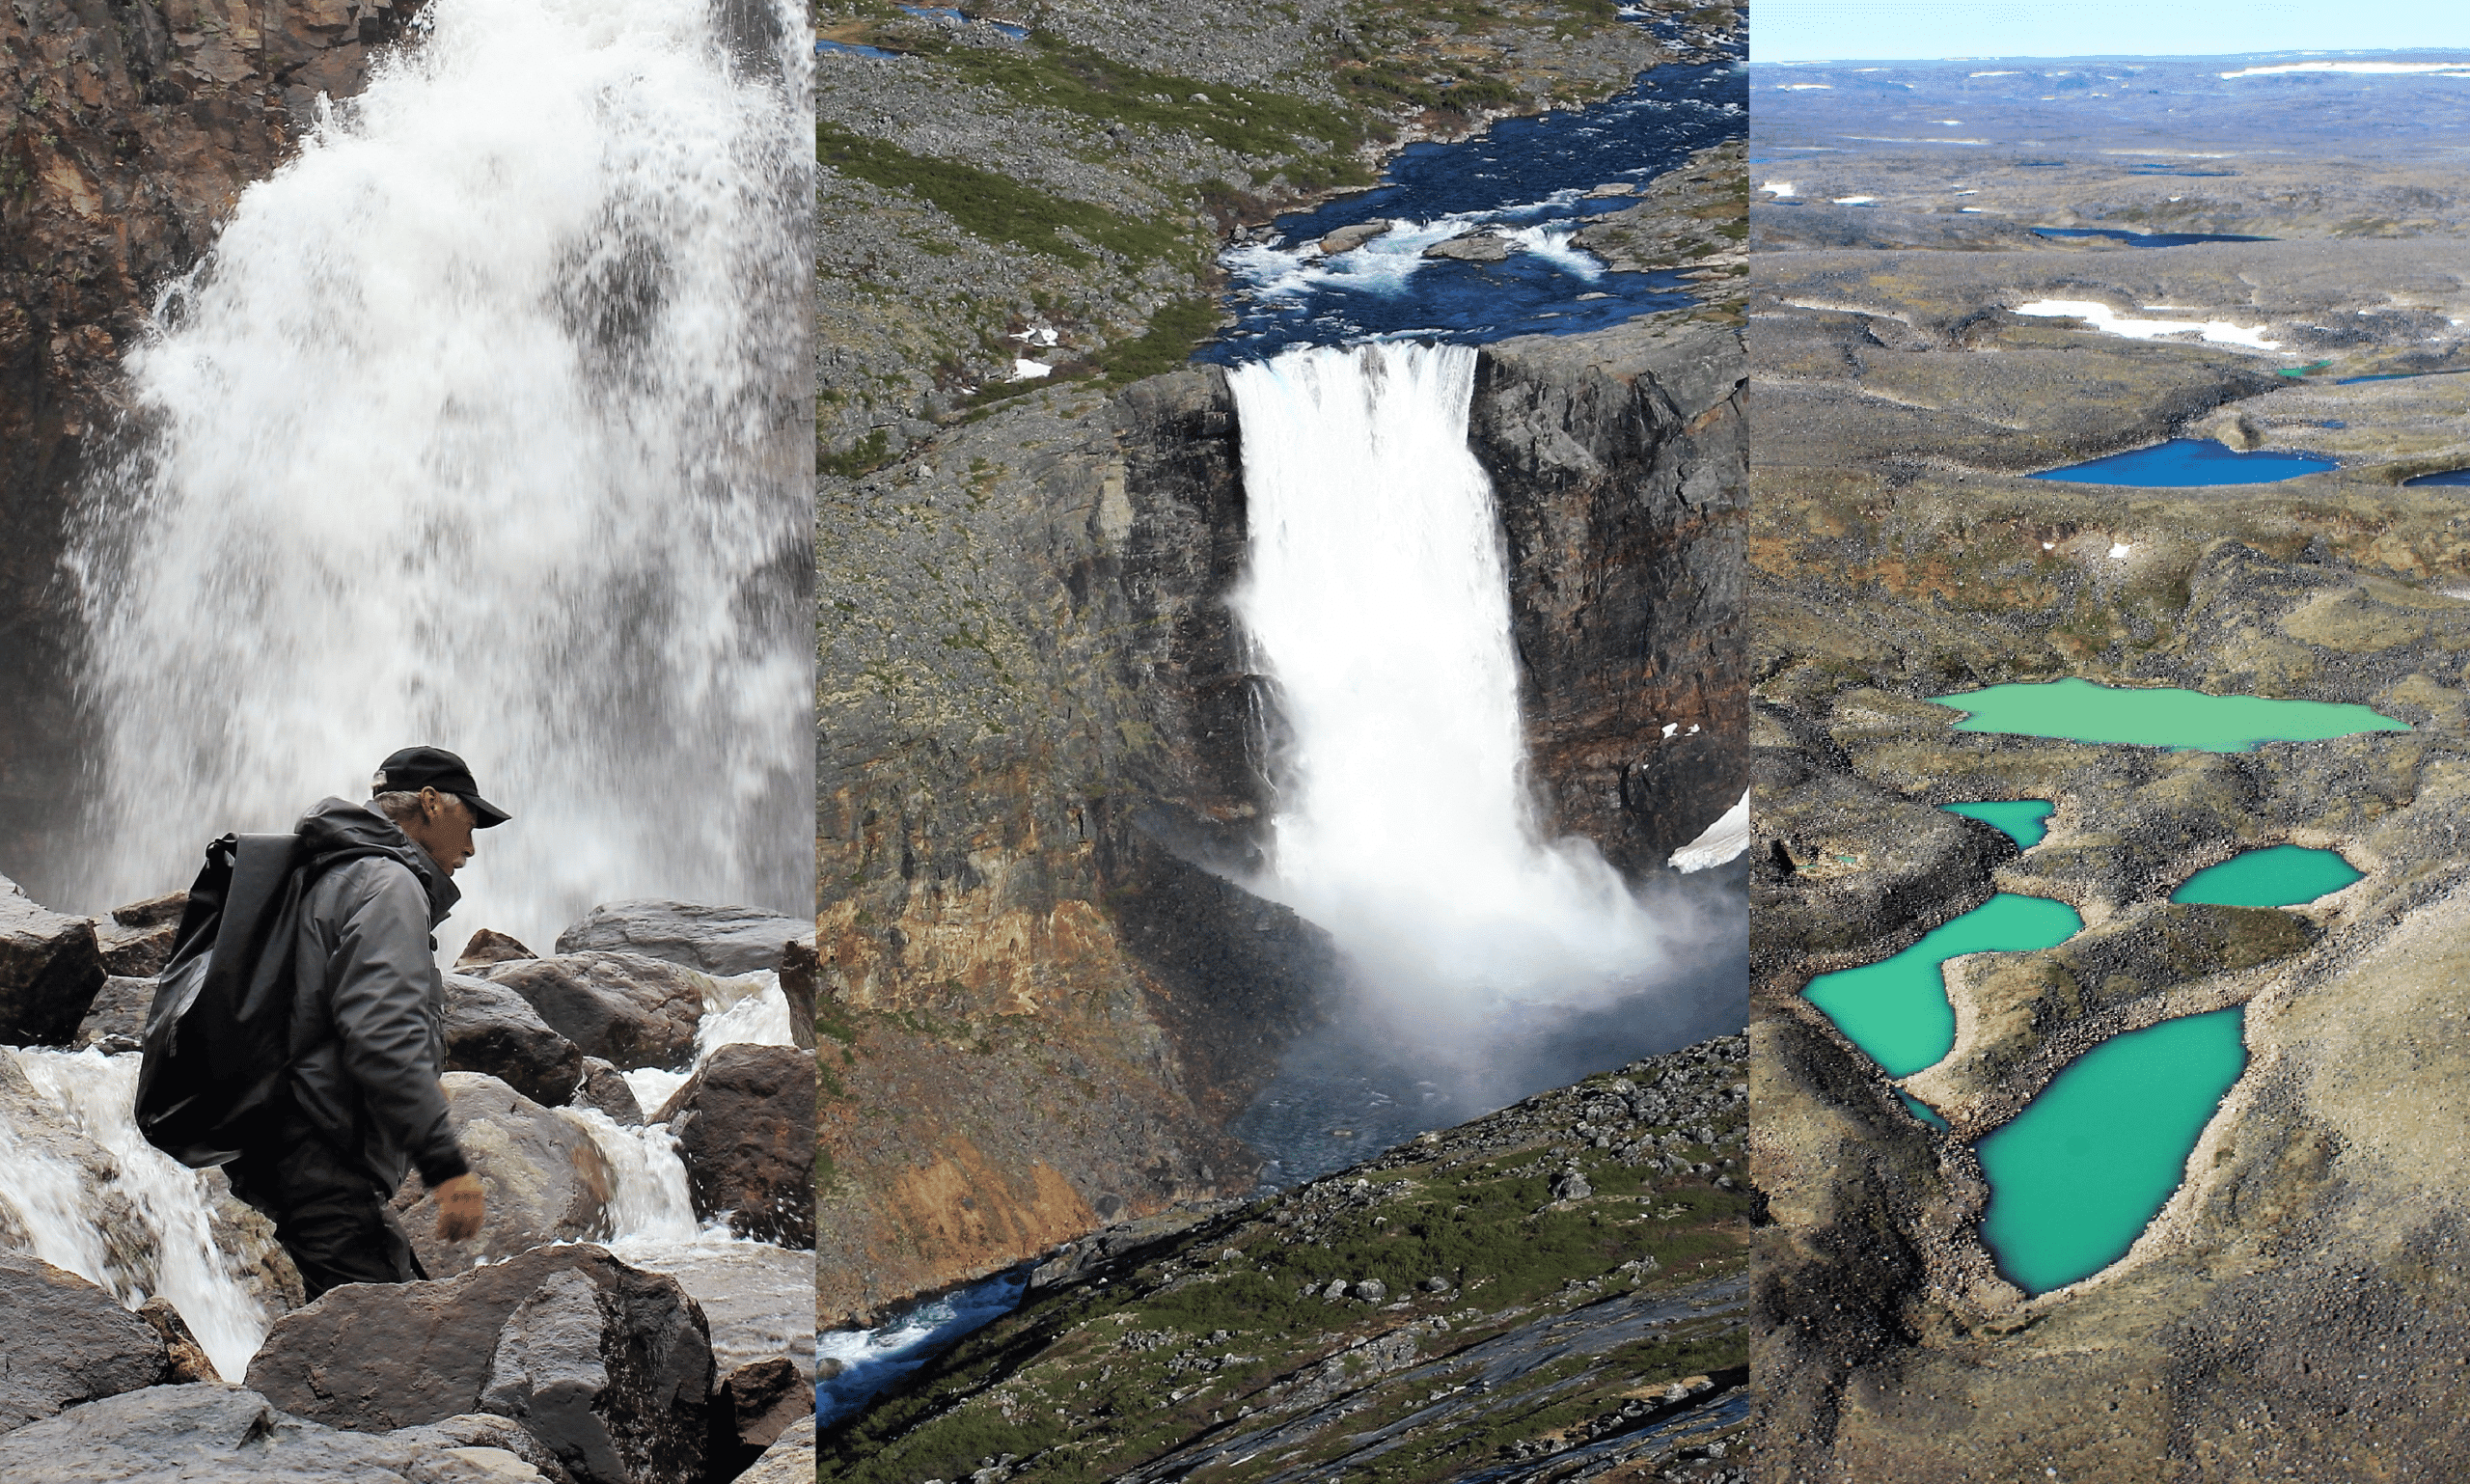 Craters, Canyons, Fjords and Waterfalls of the Golden Peninsula